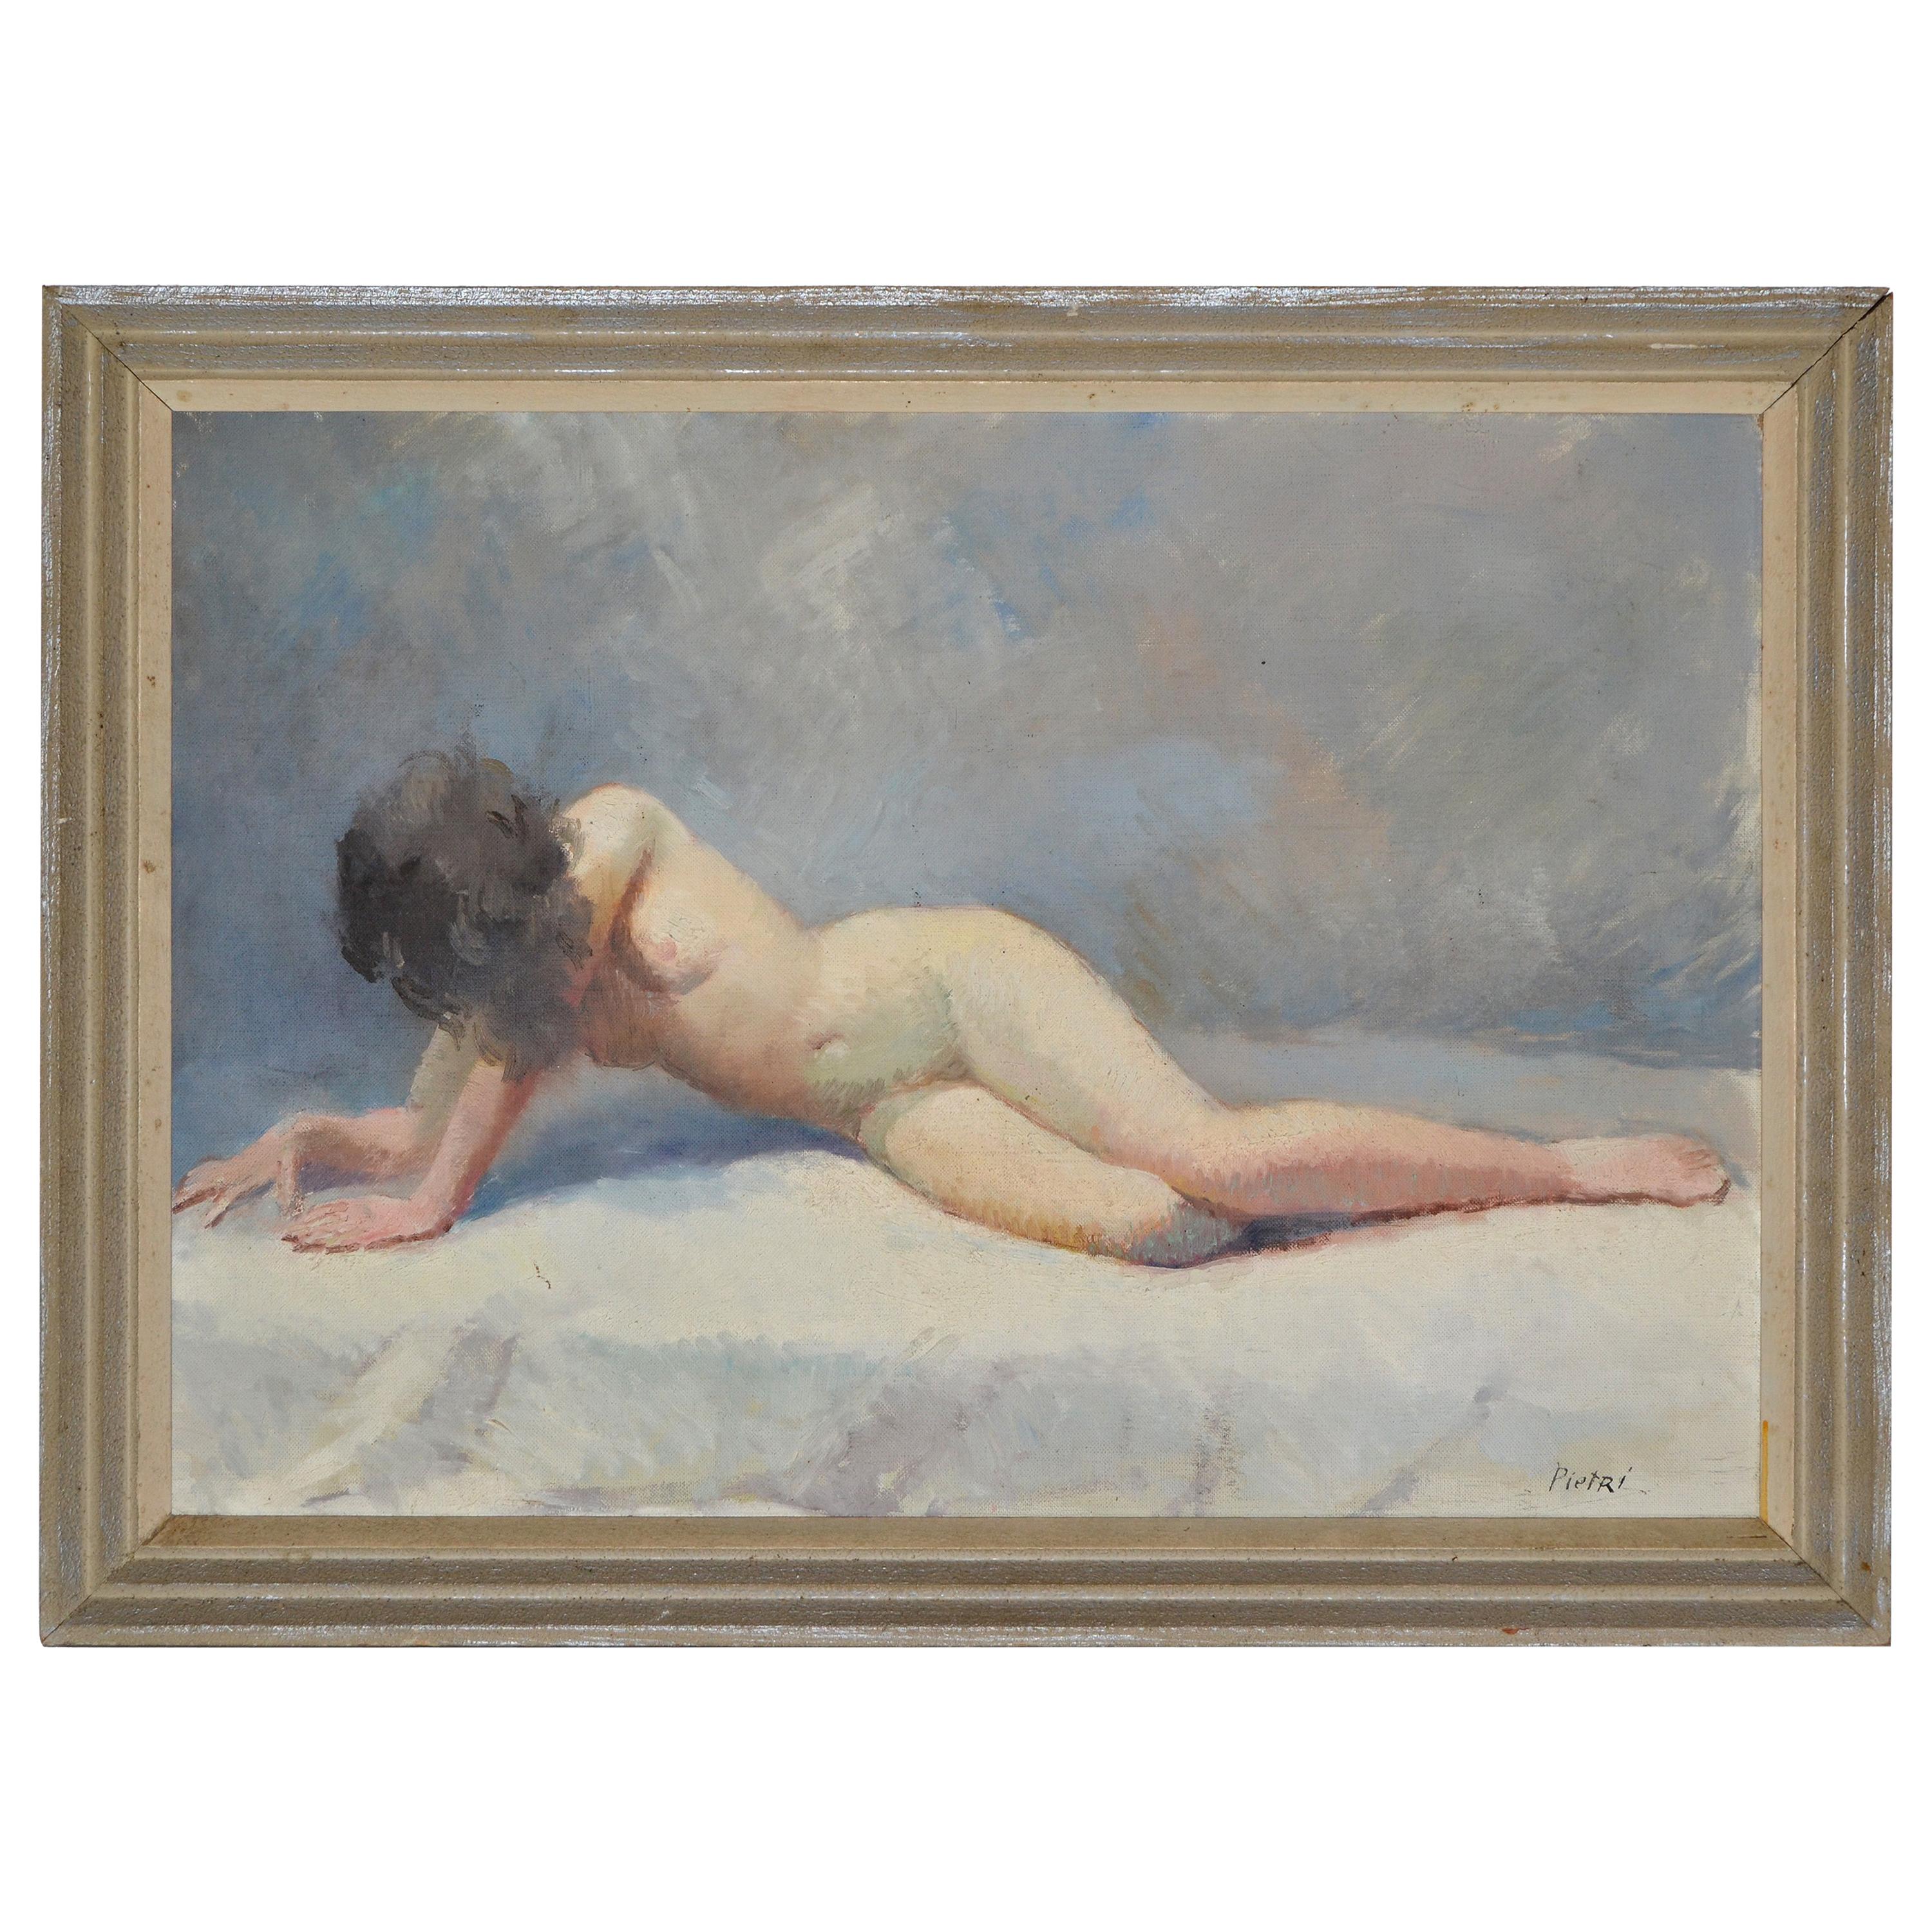 Signed Pietri French Mid-Century Modern Framed Oil Painting Resting Nude Woman For Sale at 1stDibs savannah demers naked, naked person 285 atlanta, naked woman on 285 atlanta picture